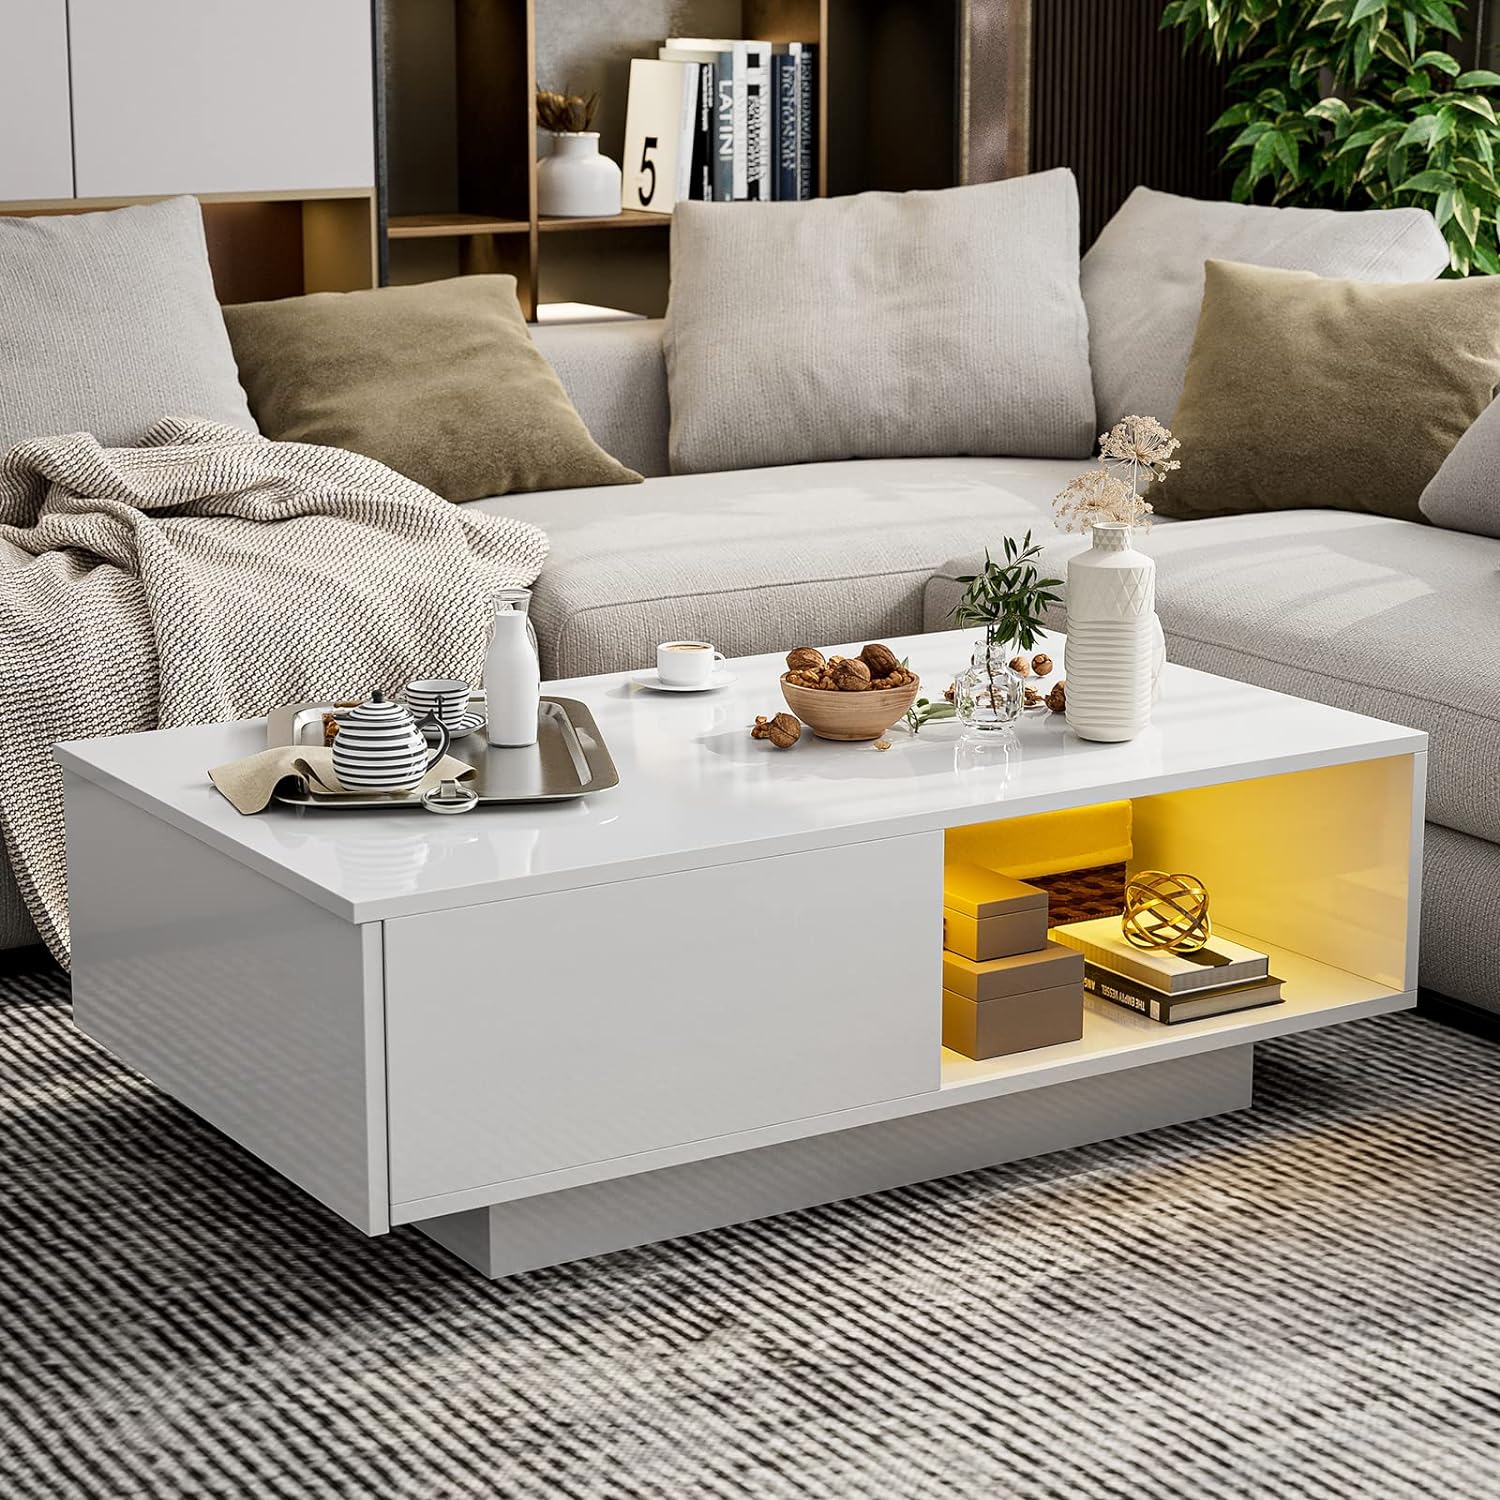 IKIFLY White Modern LED Coffee Table with A Drawer and 16 Colors LED Lights, Coffee Tables for Living Room